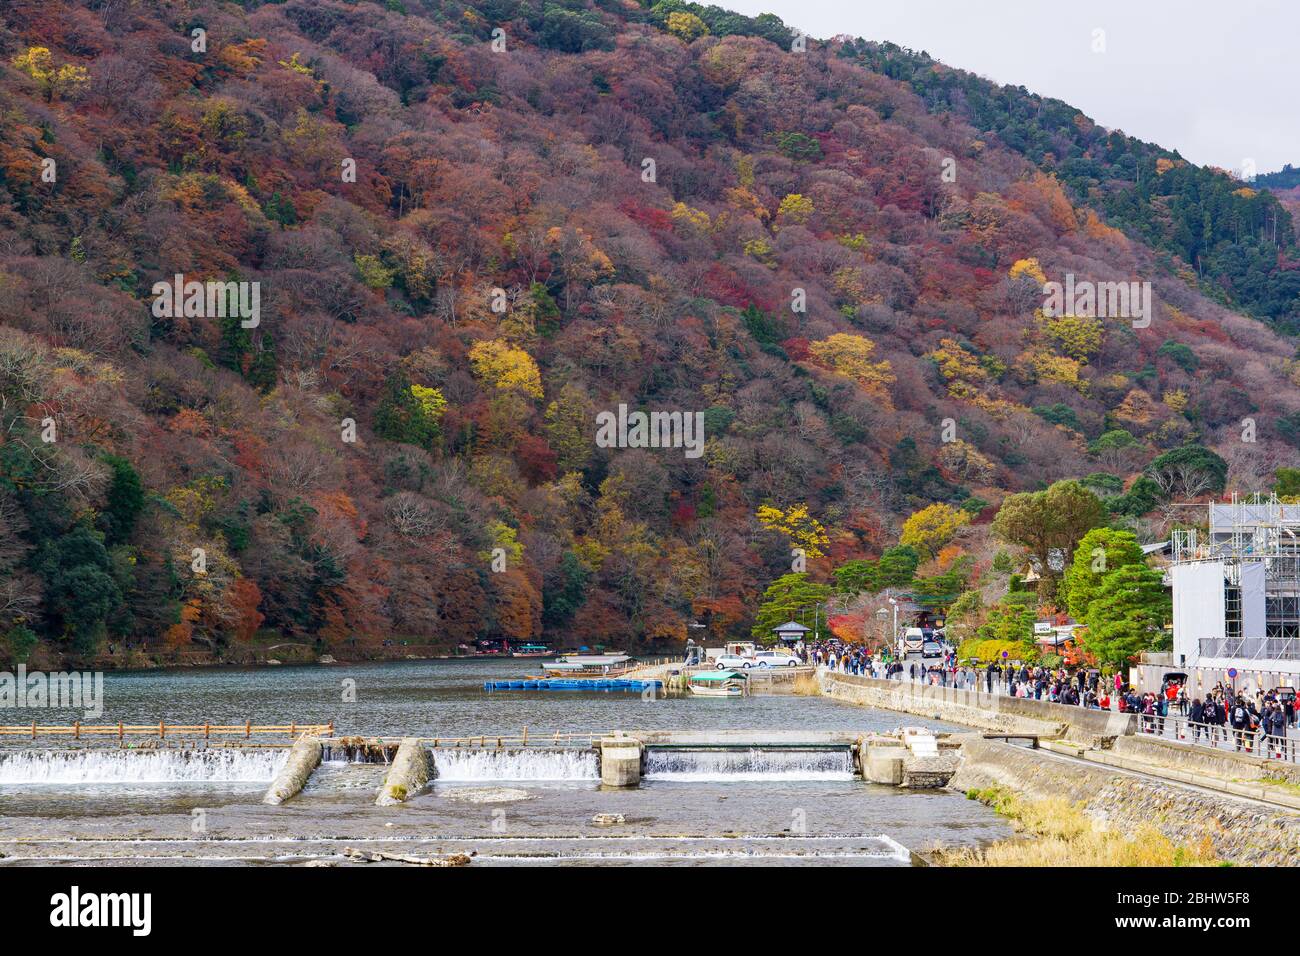 Arashiyama Togetsukyo Bridge was built during the Heian Period (794-1185), and reconstructed in the 1930s crossing the Oi River. This iconic landmark Stock Photo